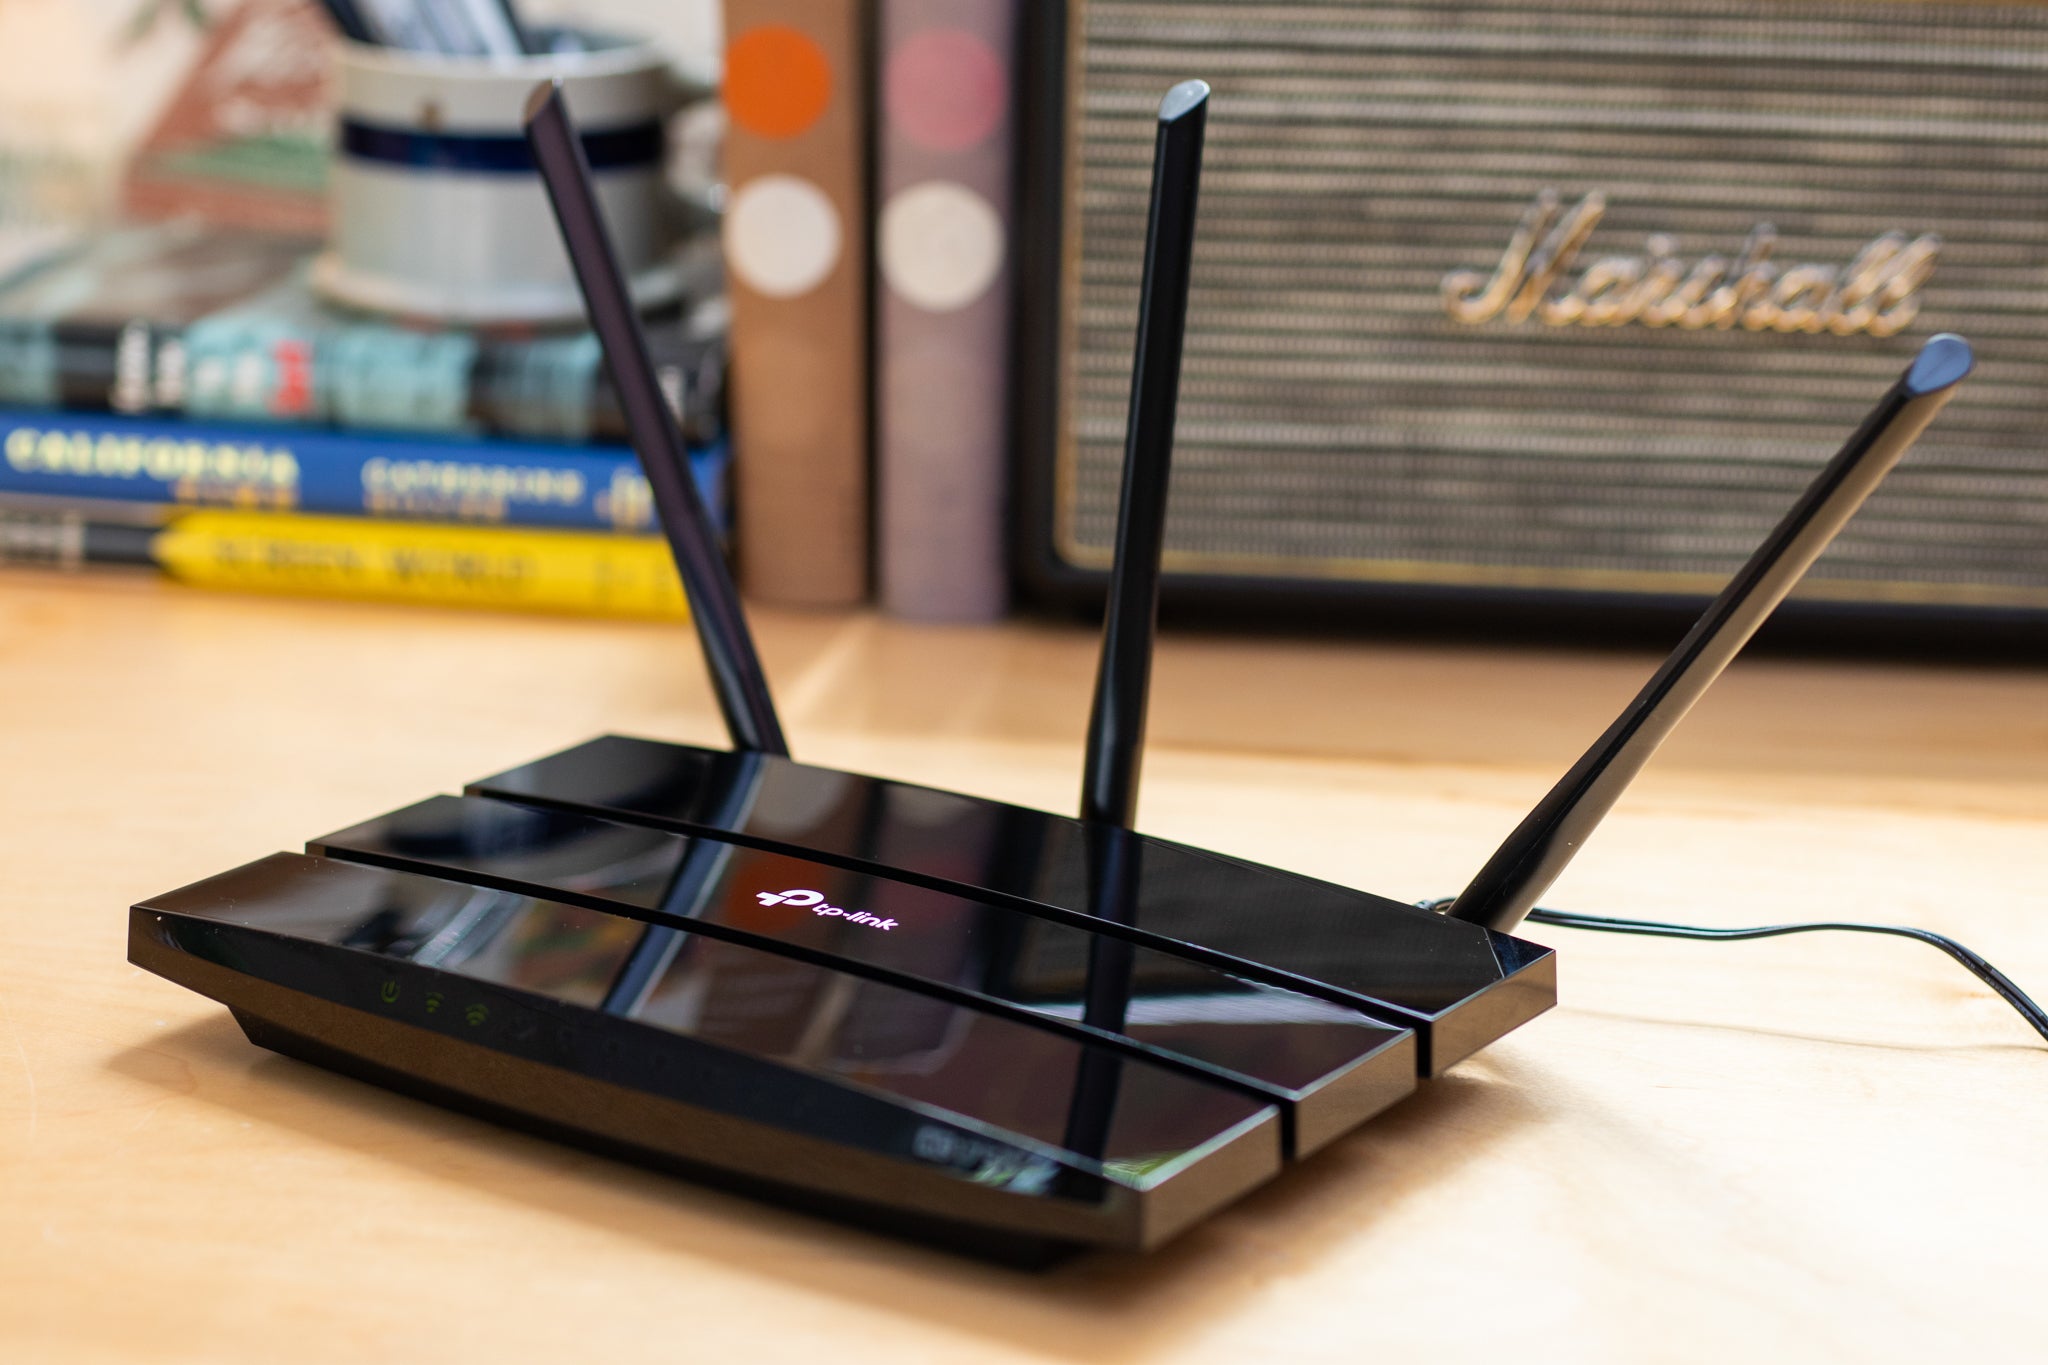 How To Block Websites On A Wi-Fi Router